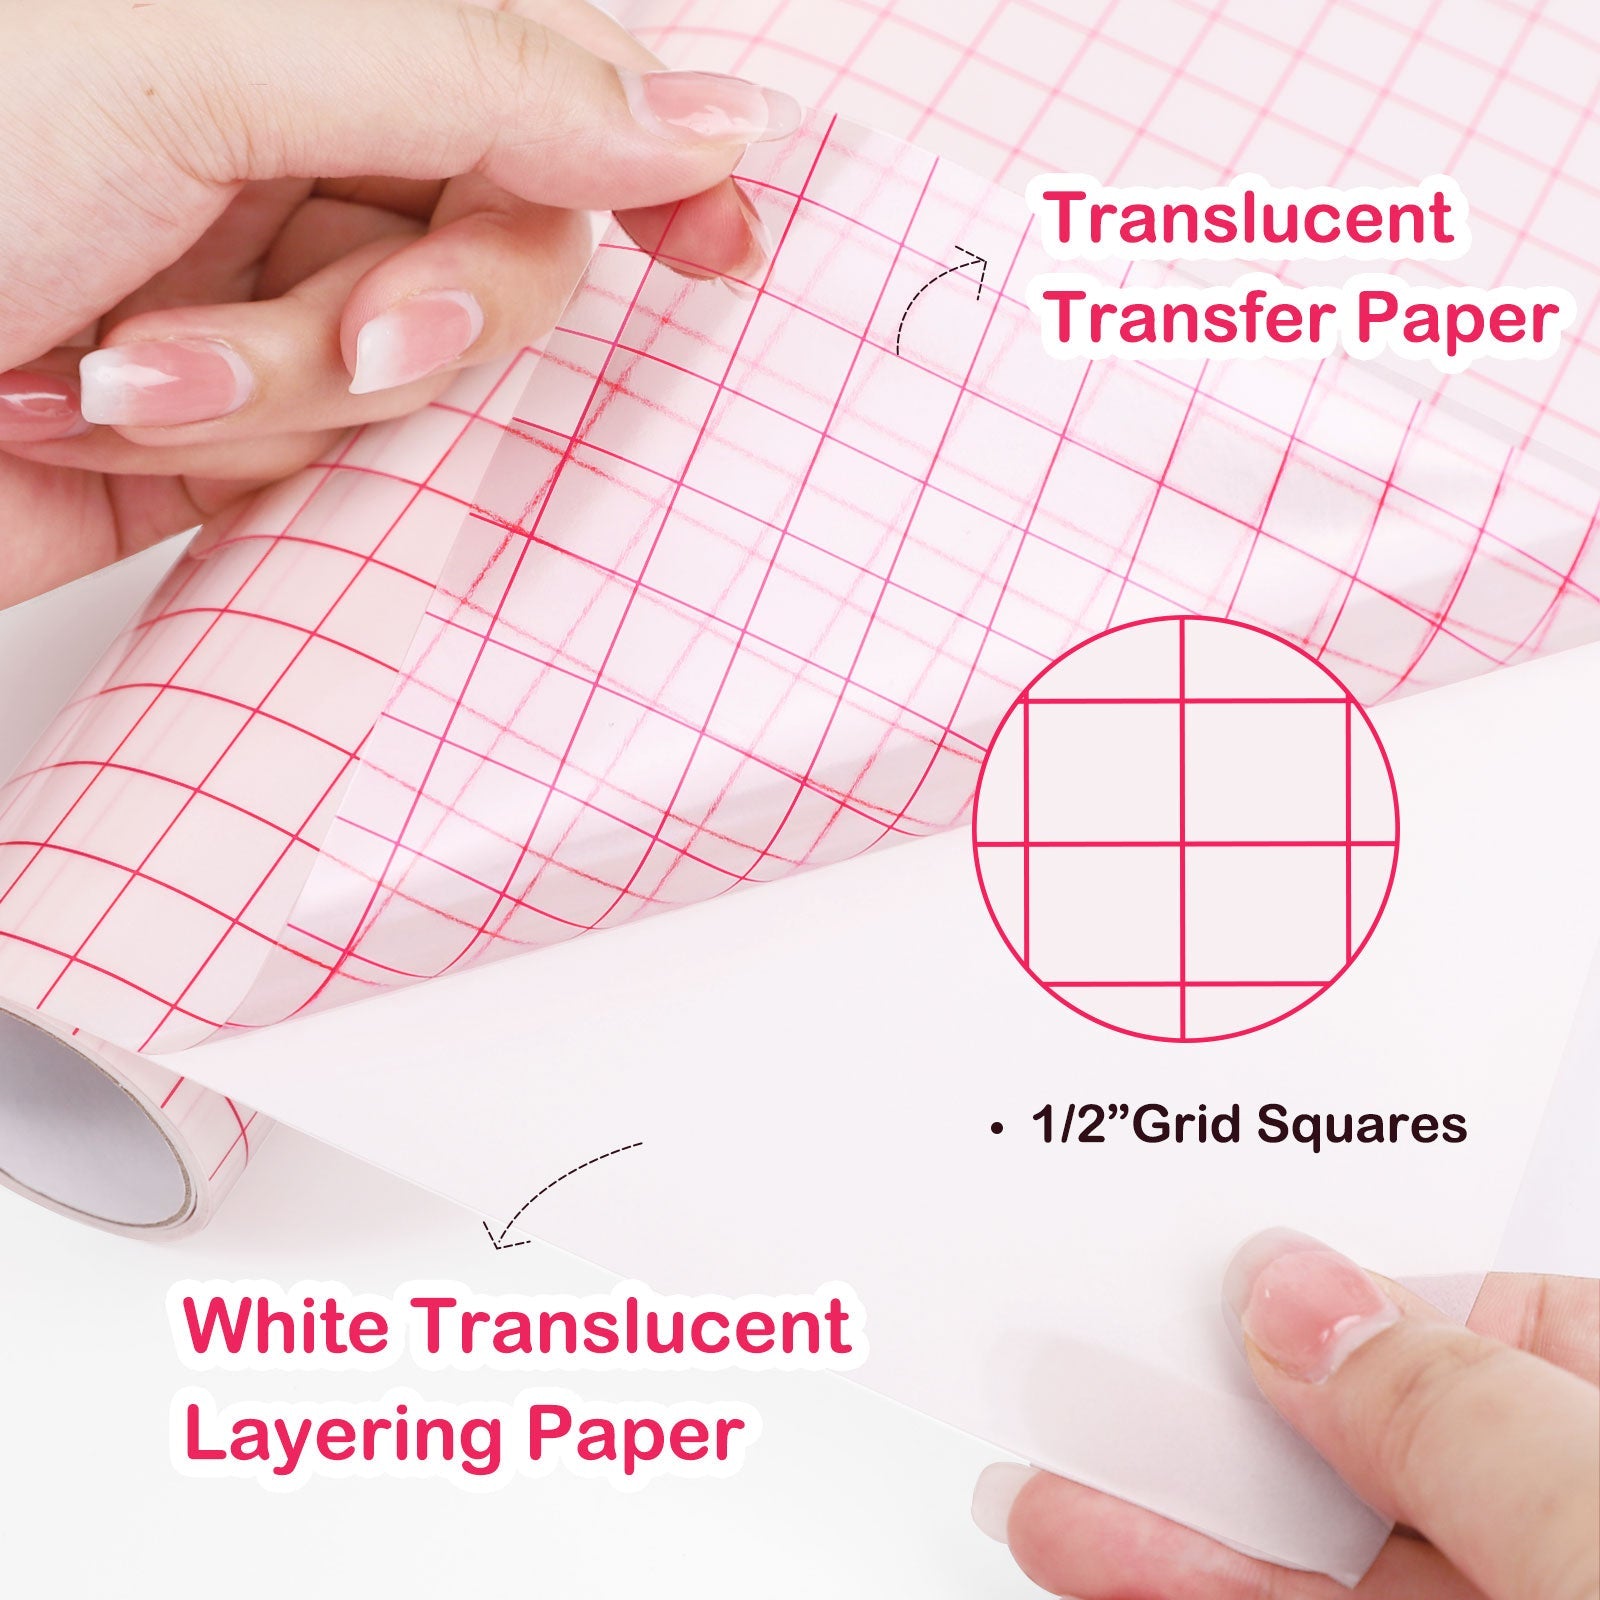 How To Use Transfer Tape With Vinyl?